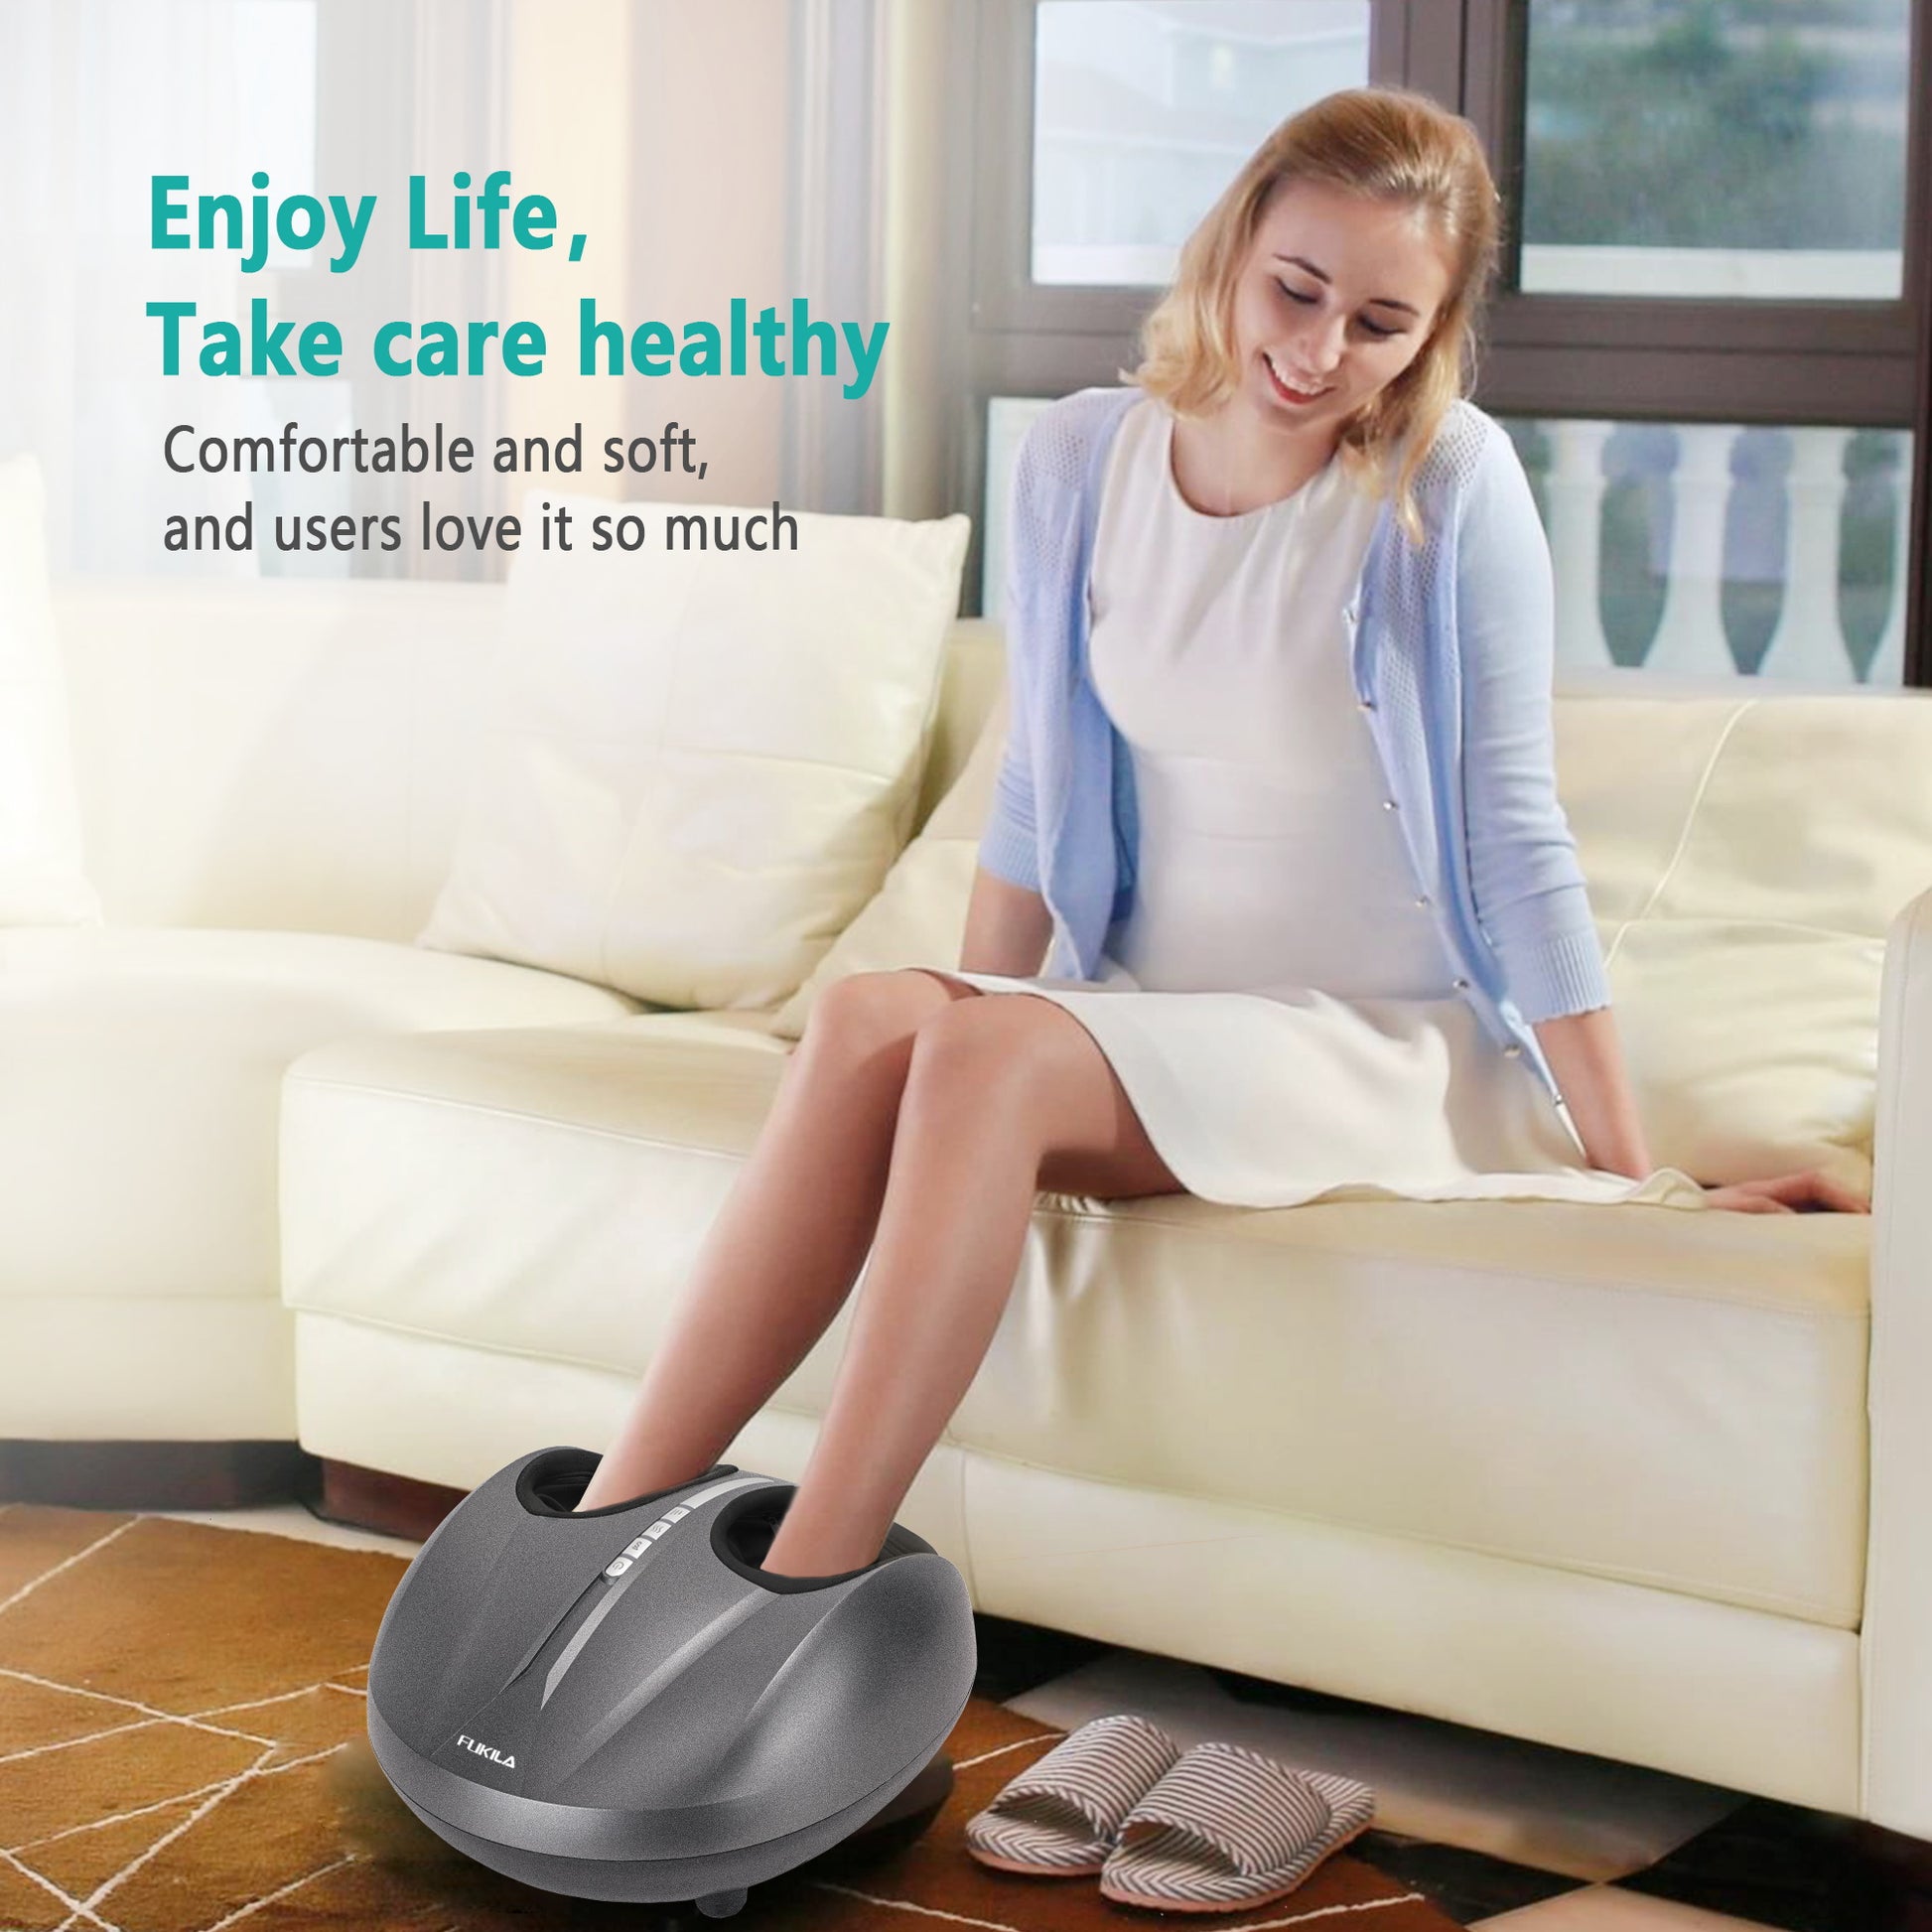 Nekteck Shiatsu Foot Massager Machine with Soothing Heat, Deep Kneading  Therapy, Air Compression, Relieve Foot Pain and Improve Blood Circulation,  Adjustable Intensity Relax for Home/Office Use 